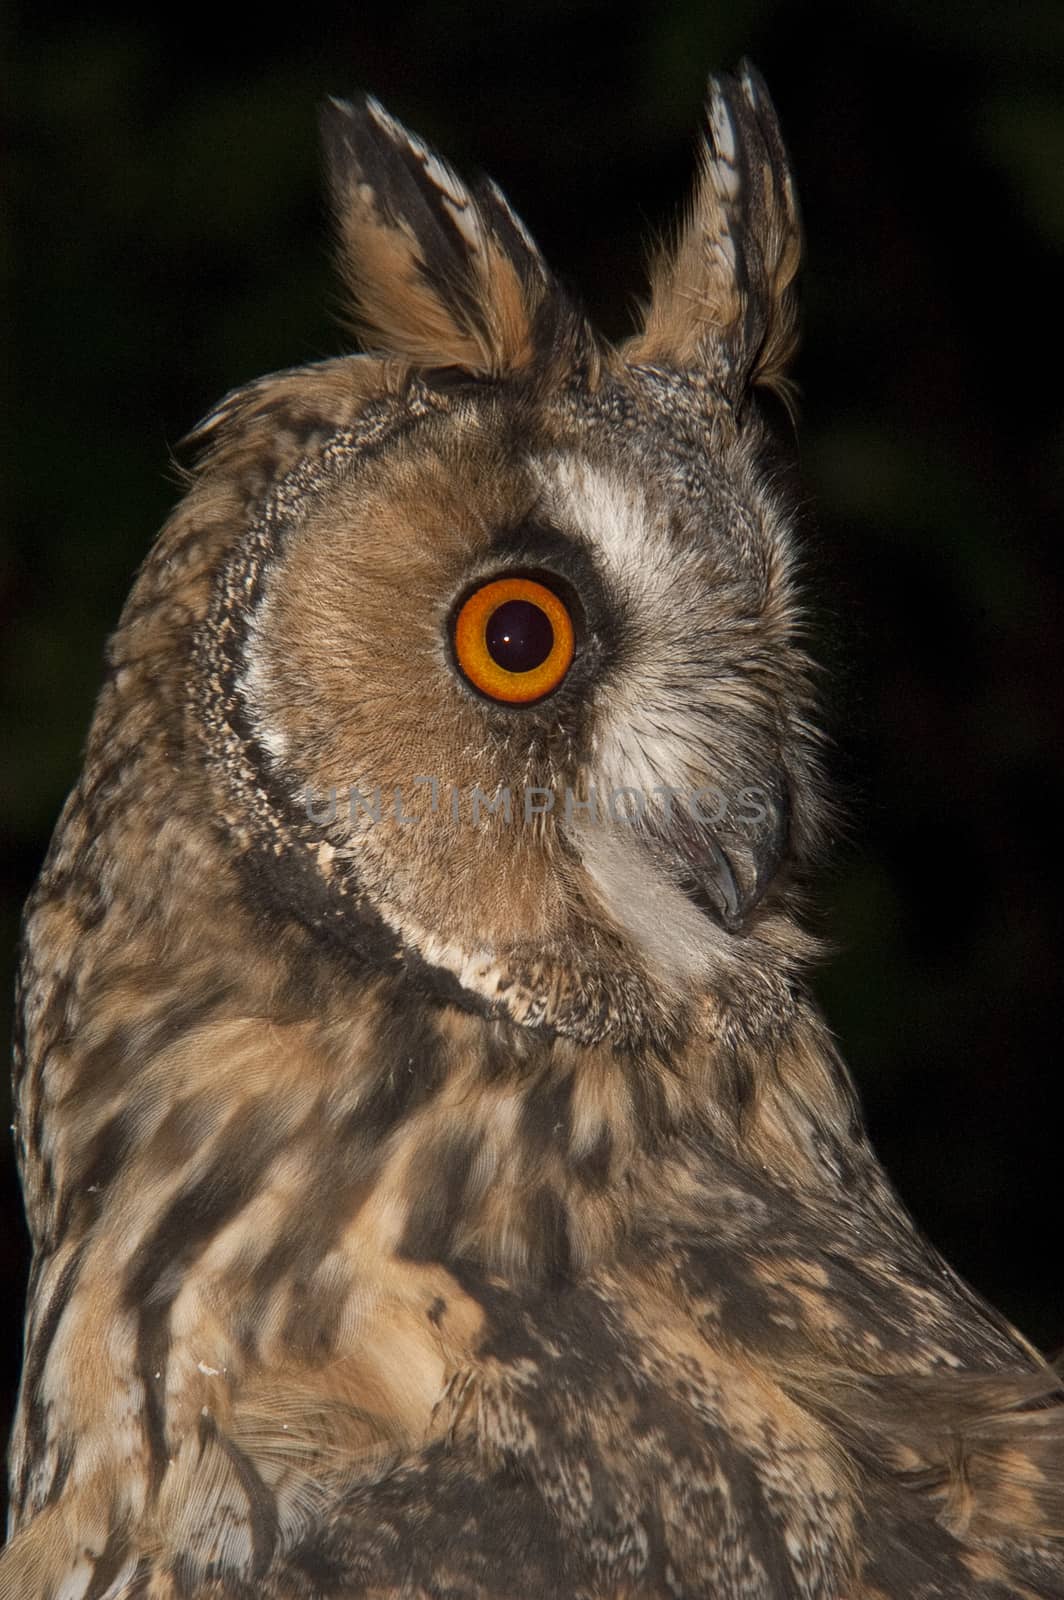 Long-eared owl (Asio otus), portrait with black background, ears by jalonsohu@gmail.com